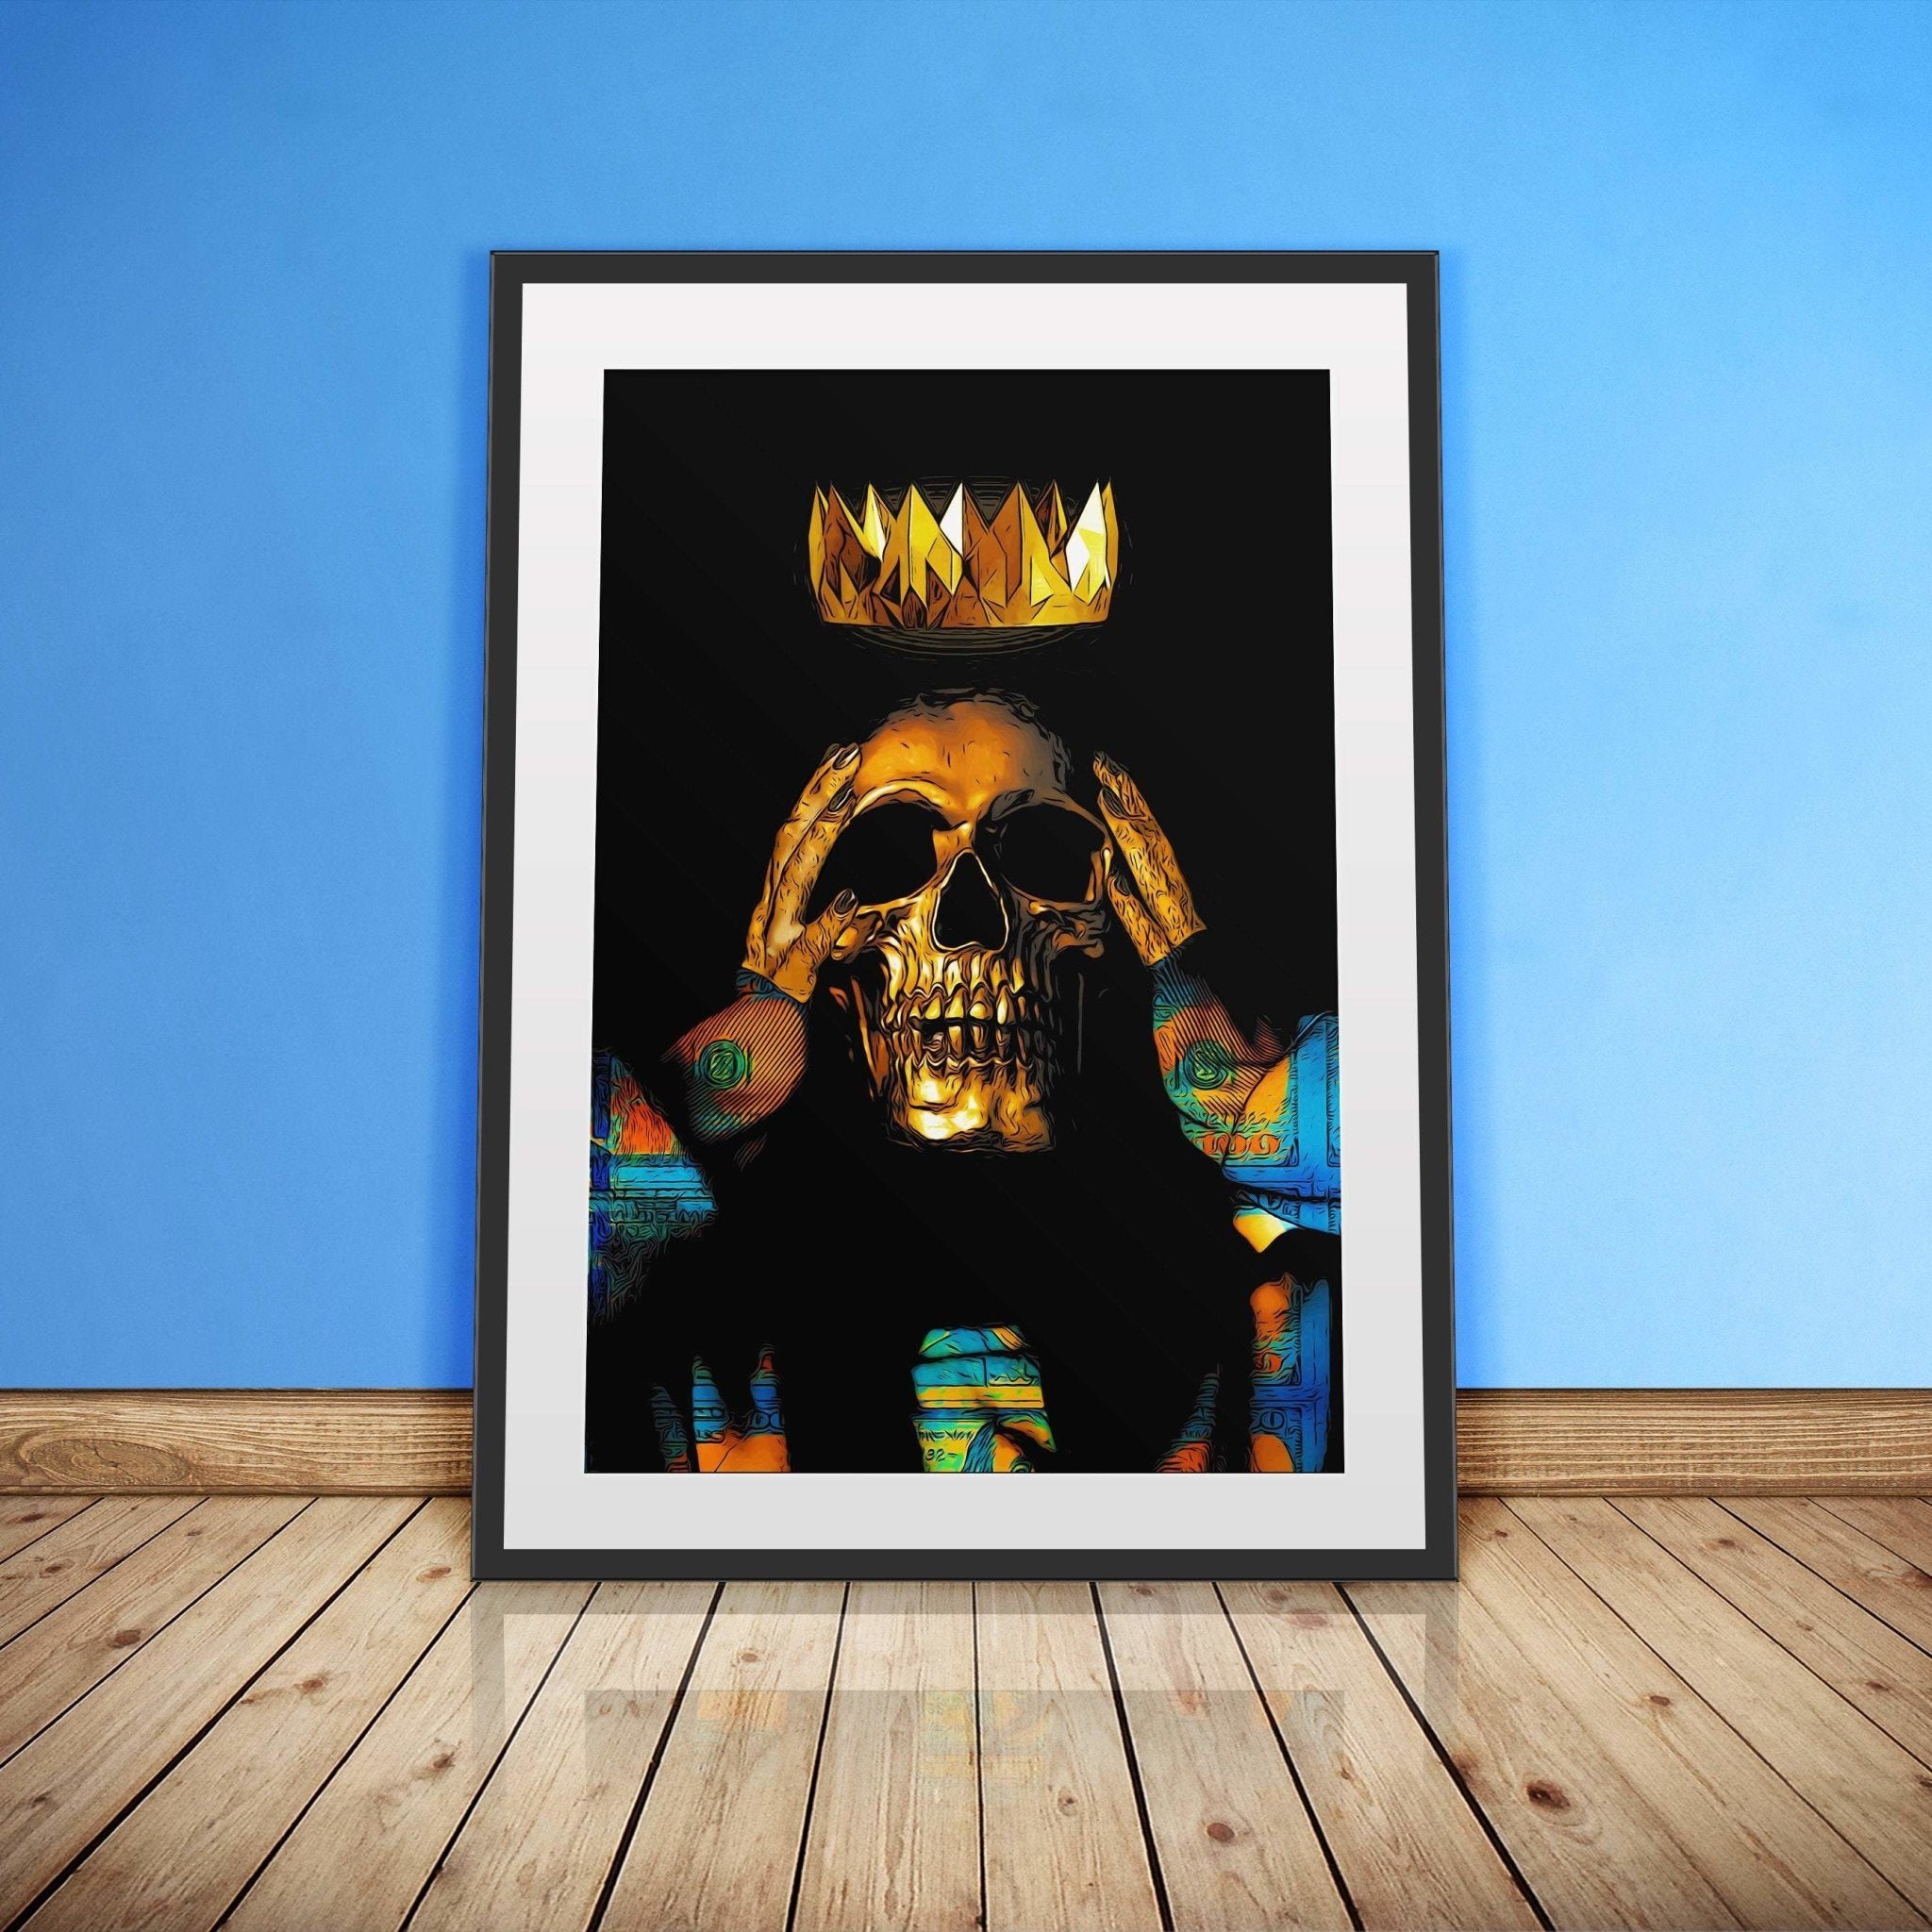 Midas Touch Skull King - Macabre Art - Midas King Gold Skull - Thedopeart,  touch of midas 